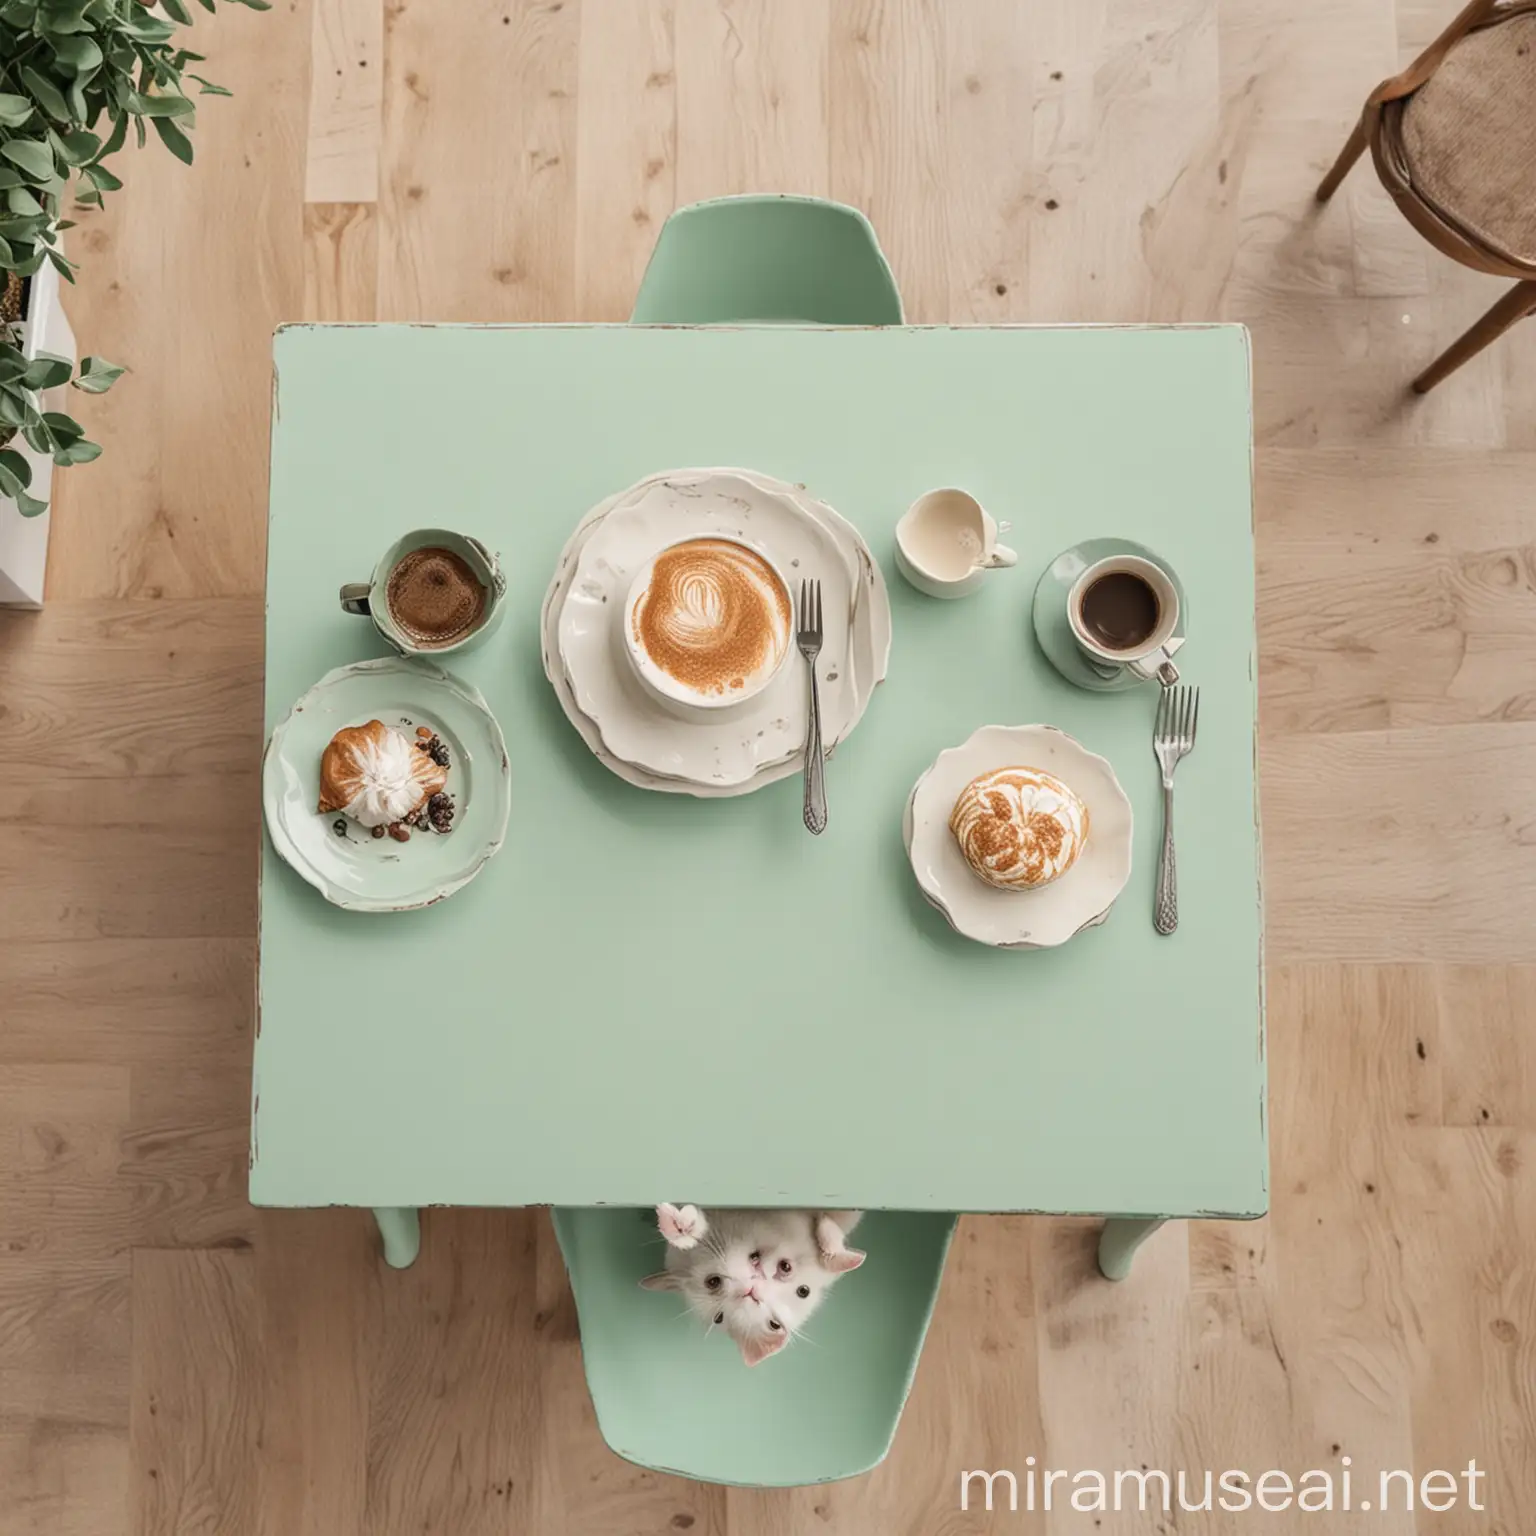 Create an image of a pastel green table viewed from a bird's eye view perspective. On the table, there should be a cute cat sitting next to a ivory coffee cup. Leave some space on the table where I can place a menu design. The overall style should be warm, cozy, and inviting, matching the vibe of a cat cafe. 